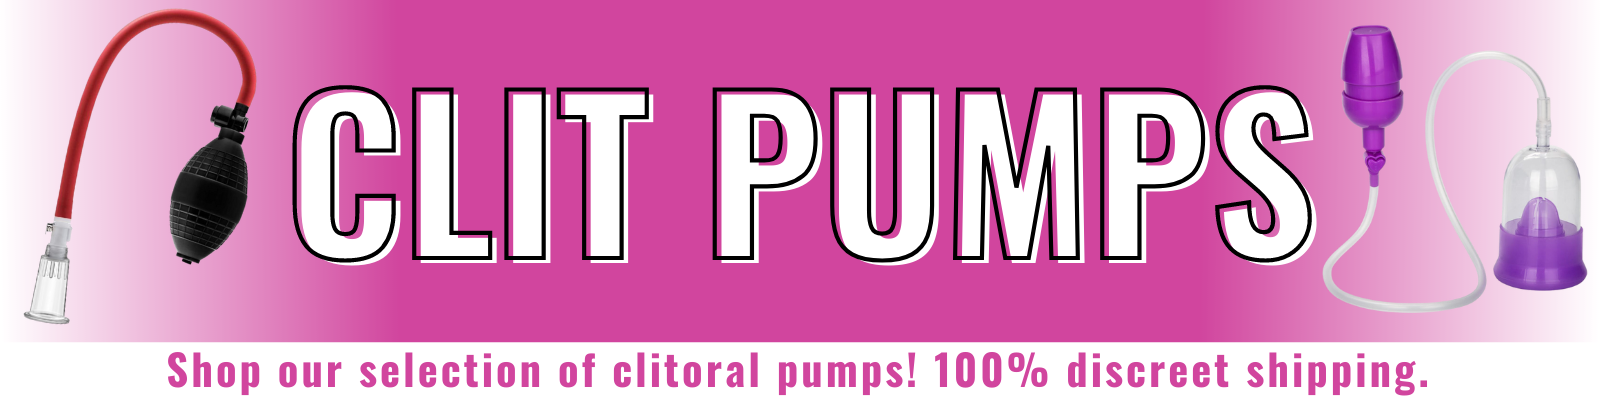 Banner for our clitoral pumps collection. Banner reads: Clit pumps. Shop our selection of clitoral pumps! 100% discreet shipping. 